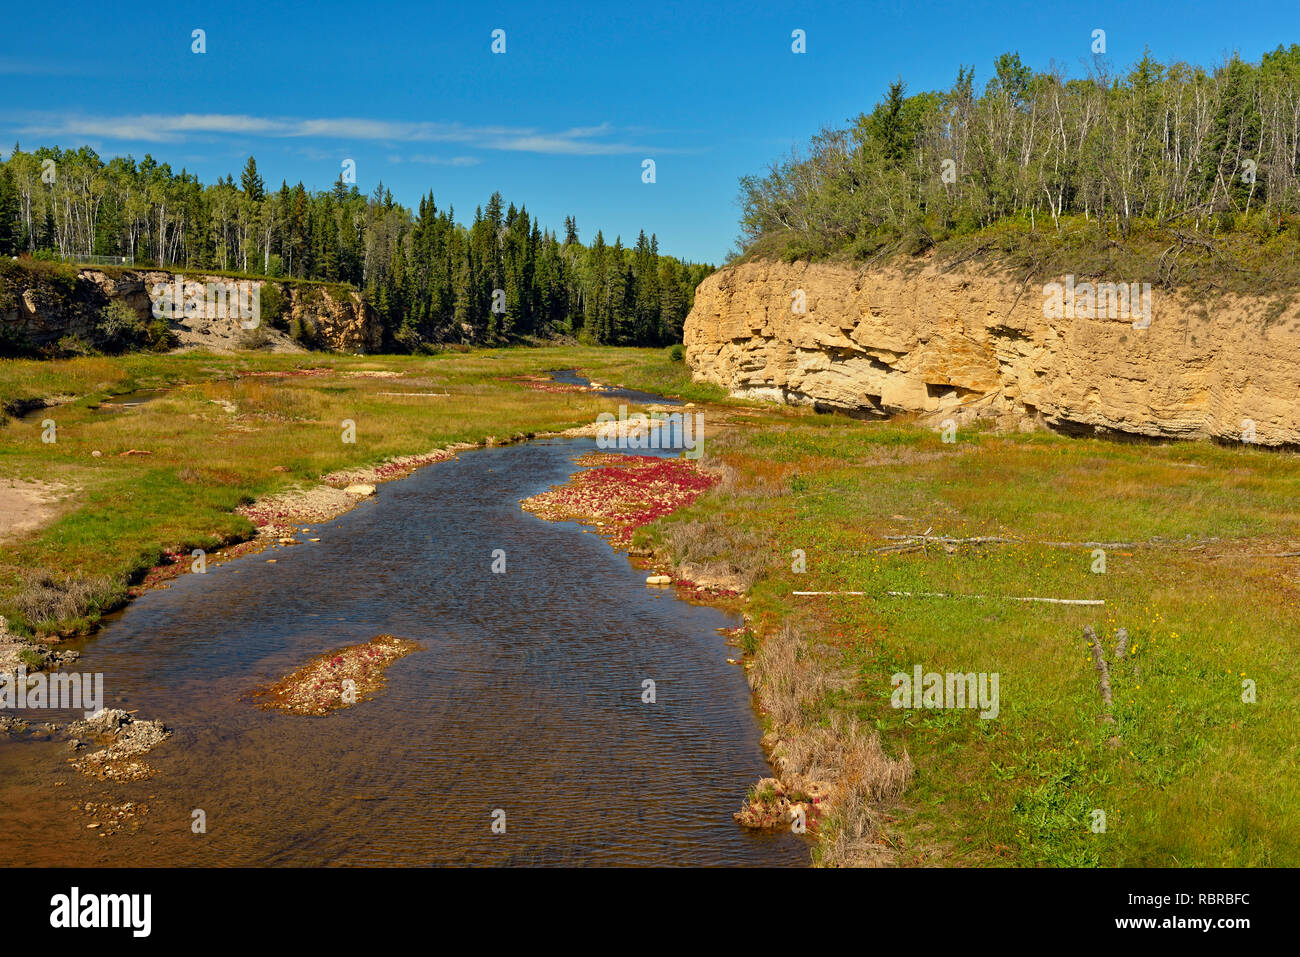 Salt River with red samphire, Wood Buffalo National Park, Northwest Territories, Canada Stock Photo